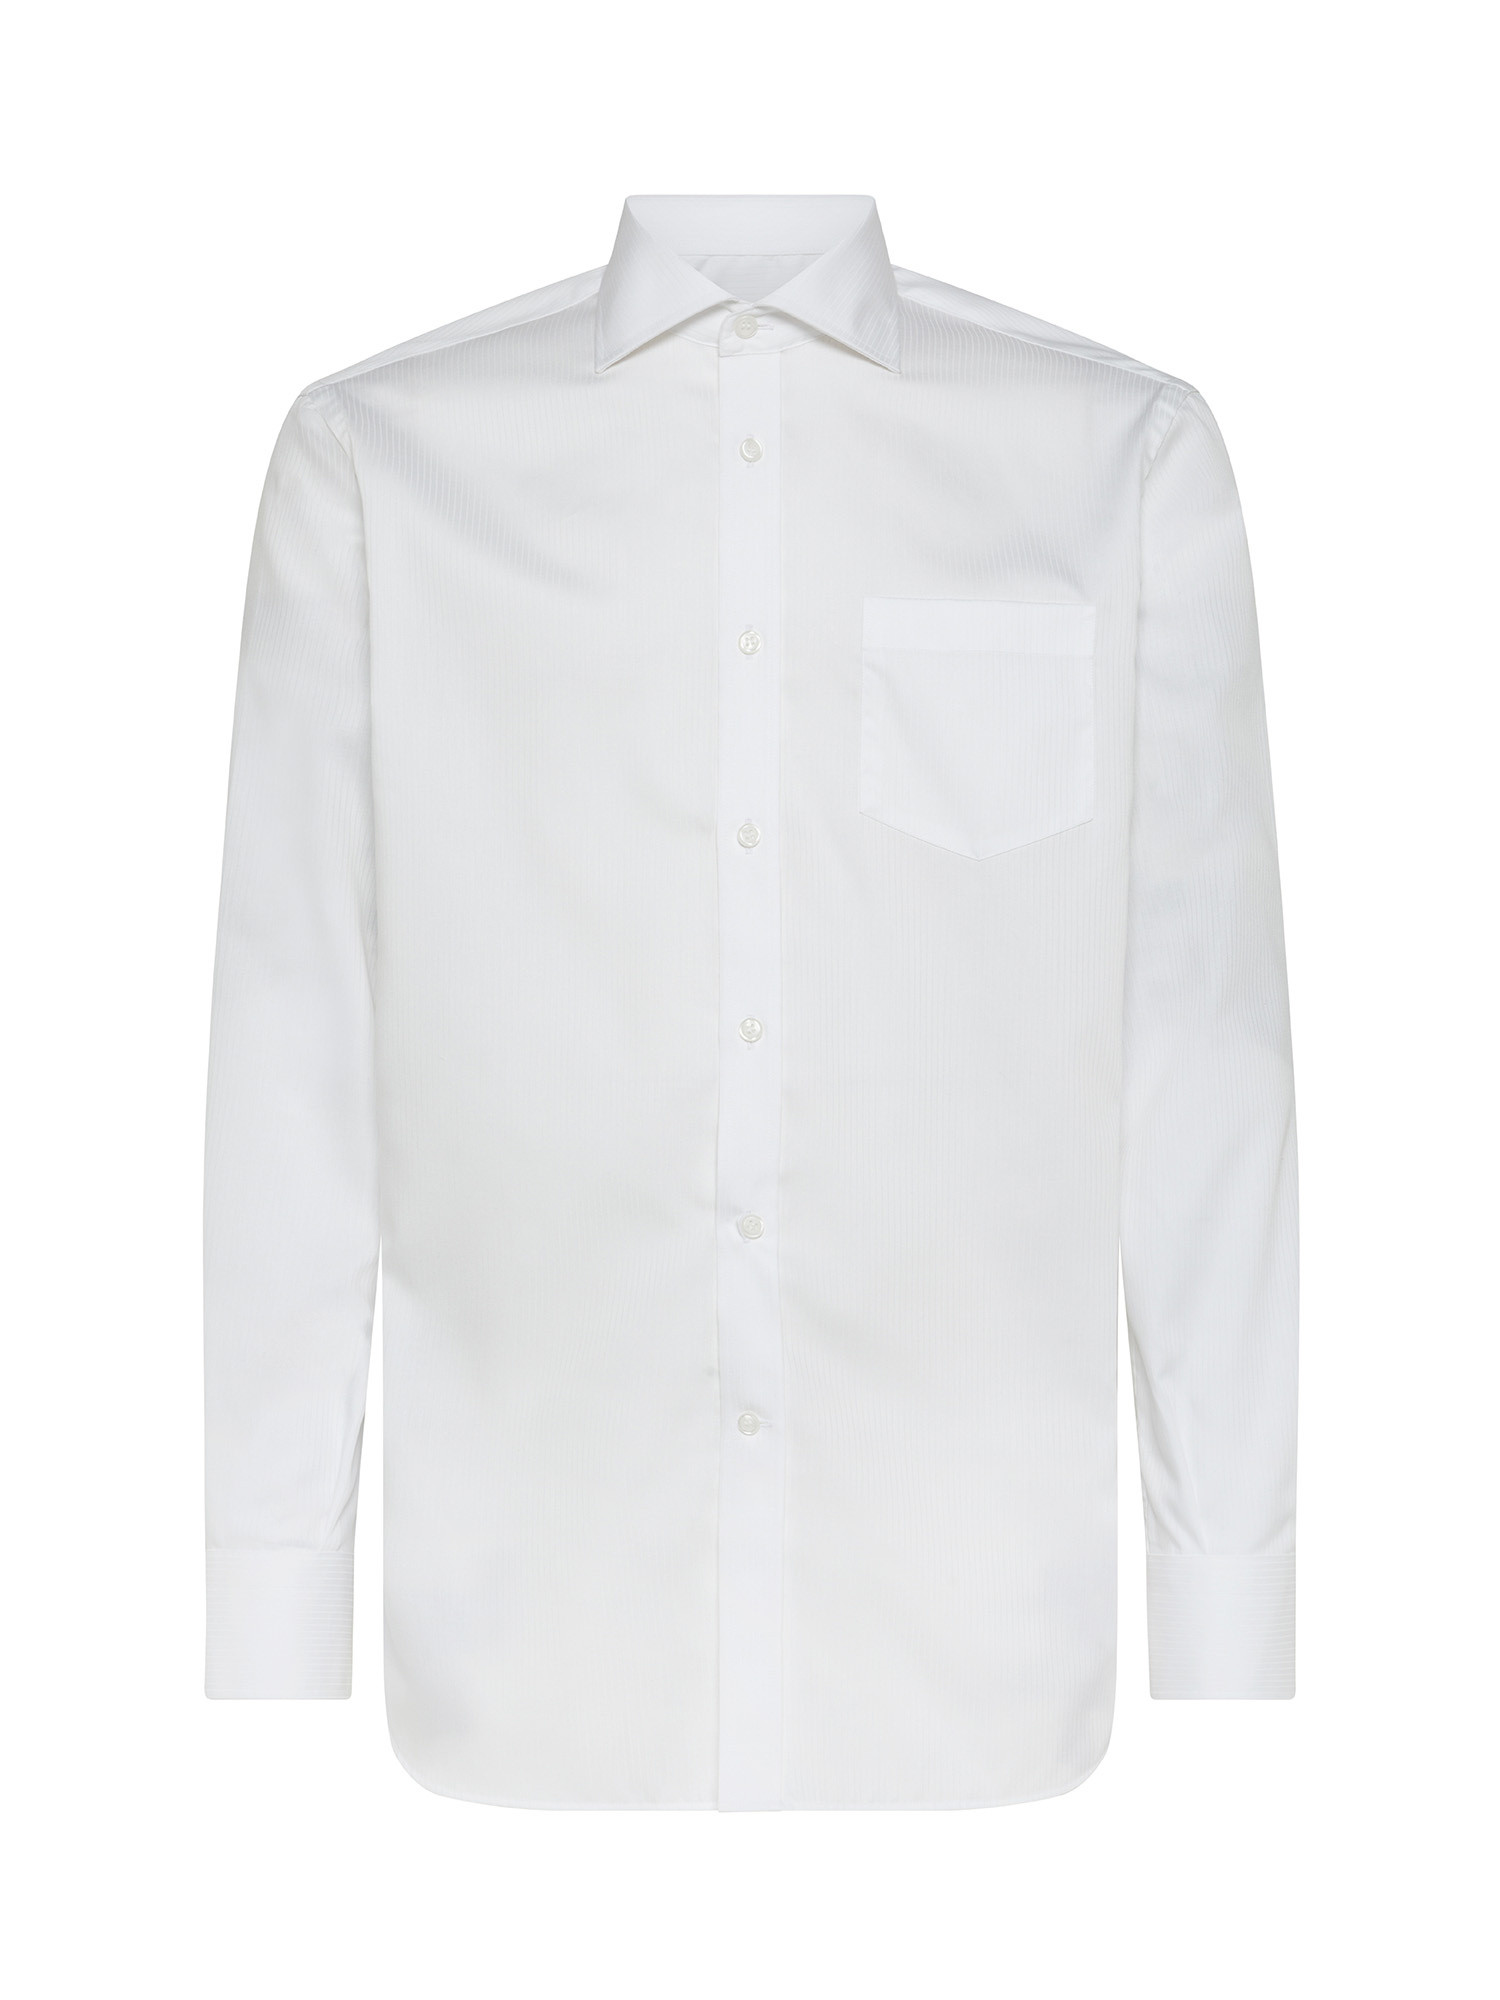 Luca D'Altieri - Regular fit shirt in pure cotton, White, large image number 0